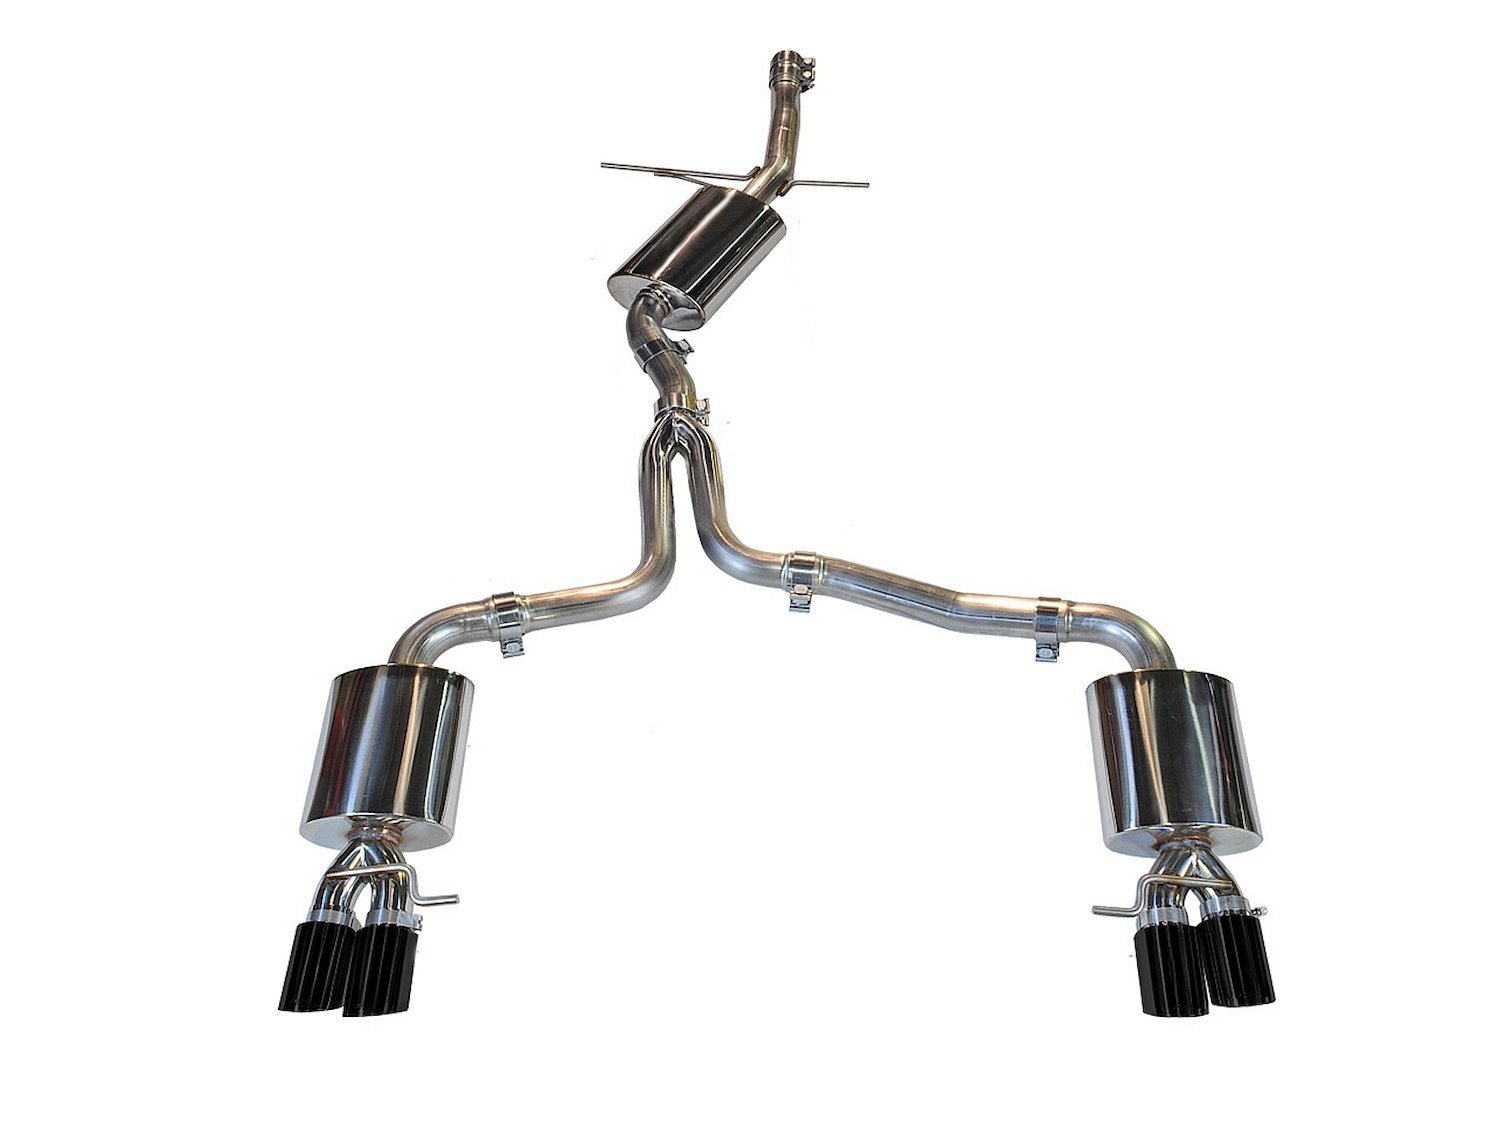 AWE Touring Edition Exhaust for B8 A4 2.0T - Quad Tip, Diamond Black Tips